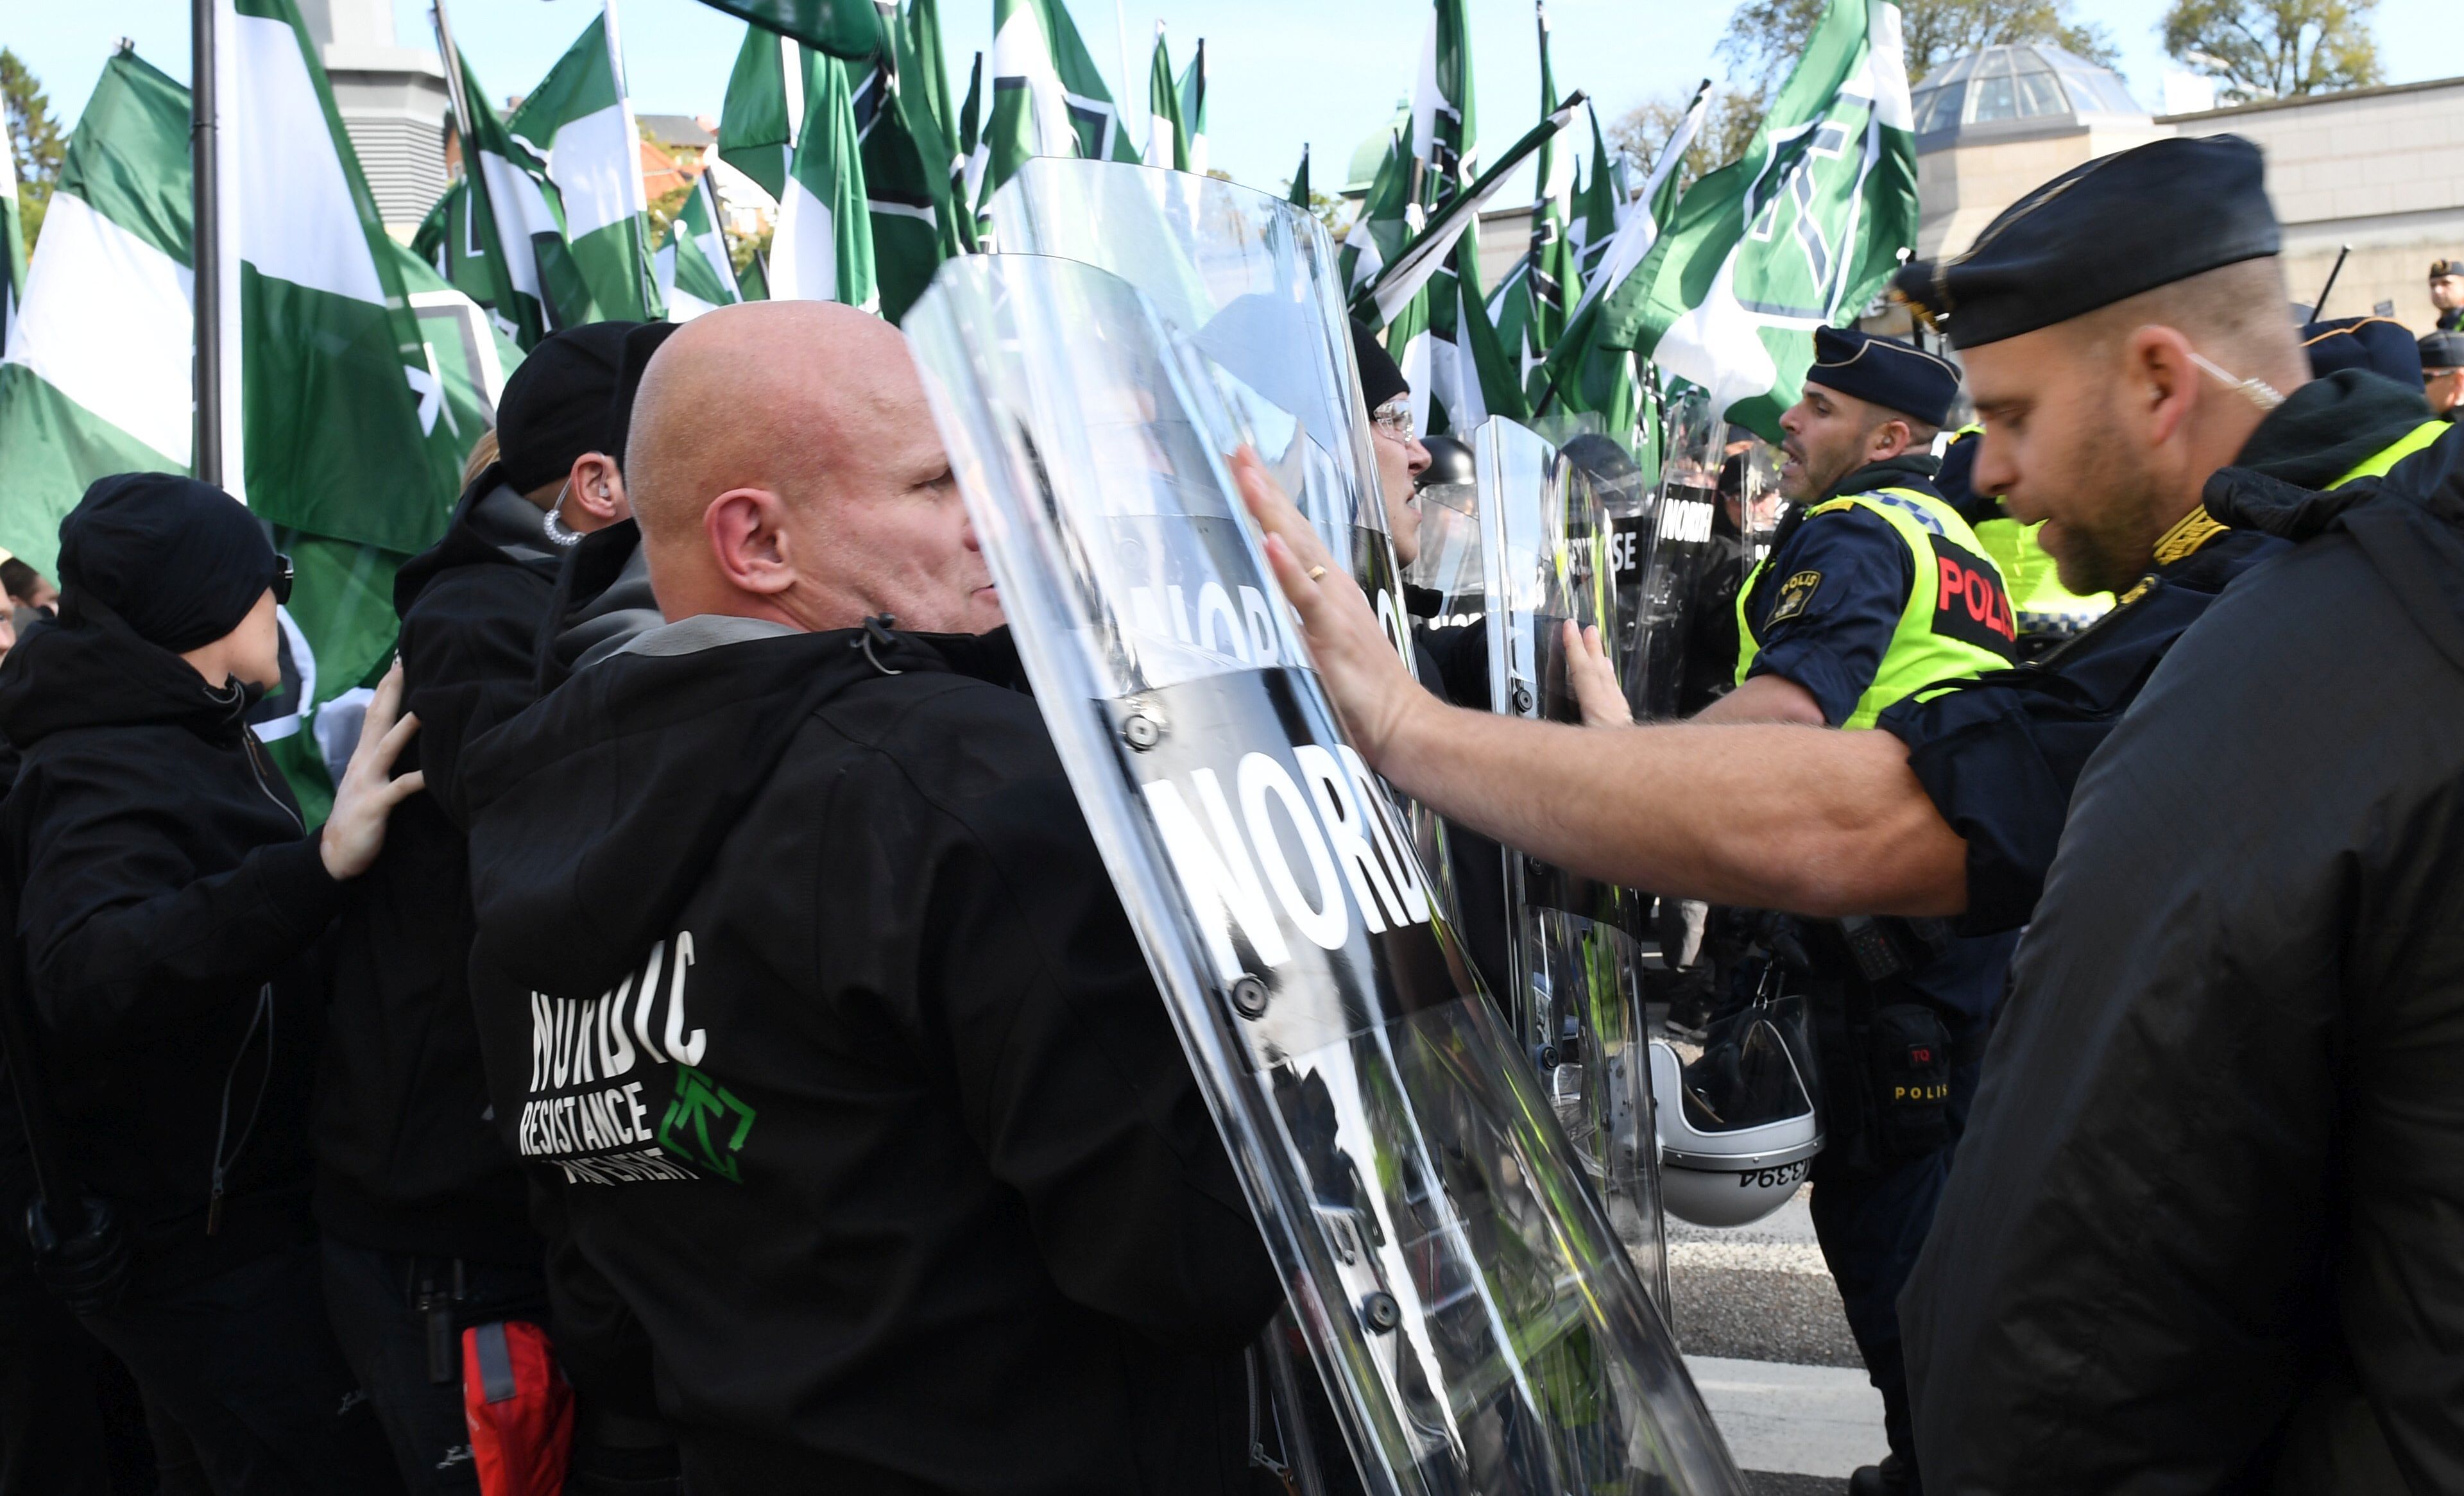 epa06235924 Police officers scuffle with NMR demonstrators while they try to walk a forbiden street during the Nordic Resistance Movement (NMR) march in central Gothenburg, Sweden, 30 September 2017.  EPA/FREDRIK SANDBERG  SWEDEN OUT